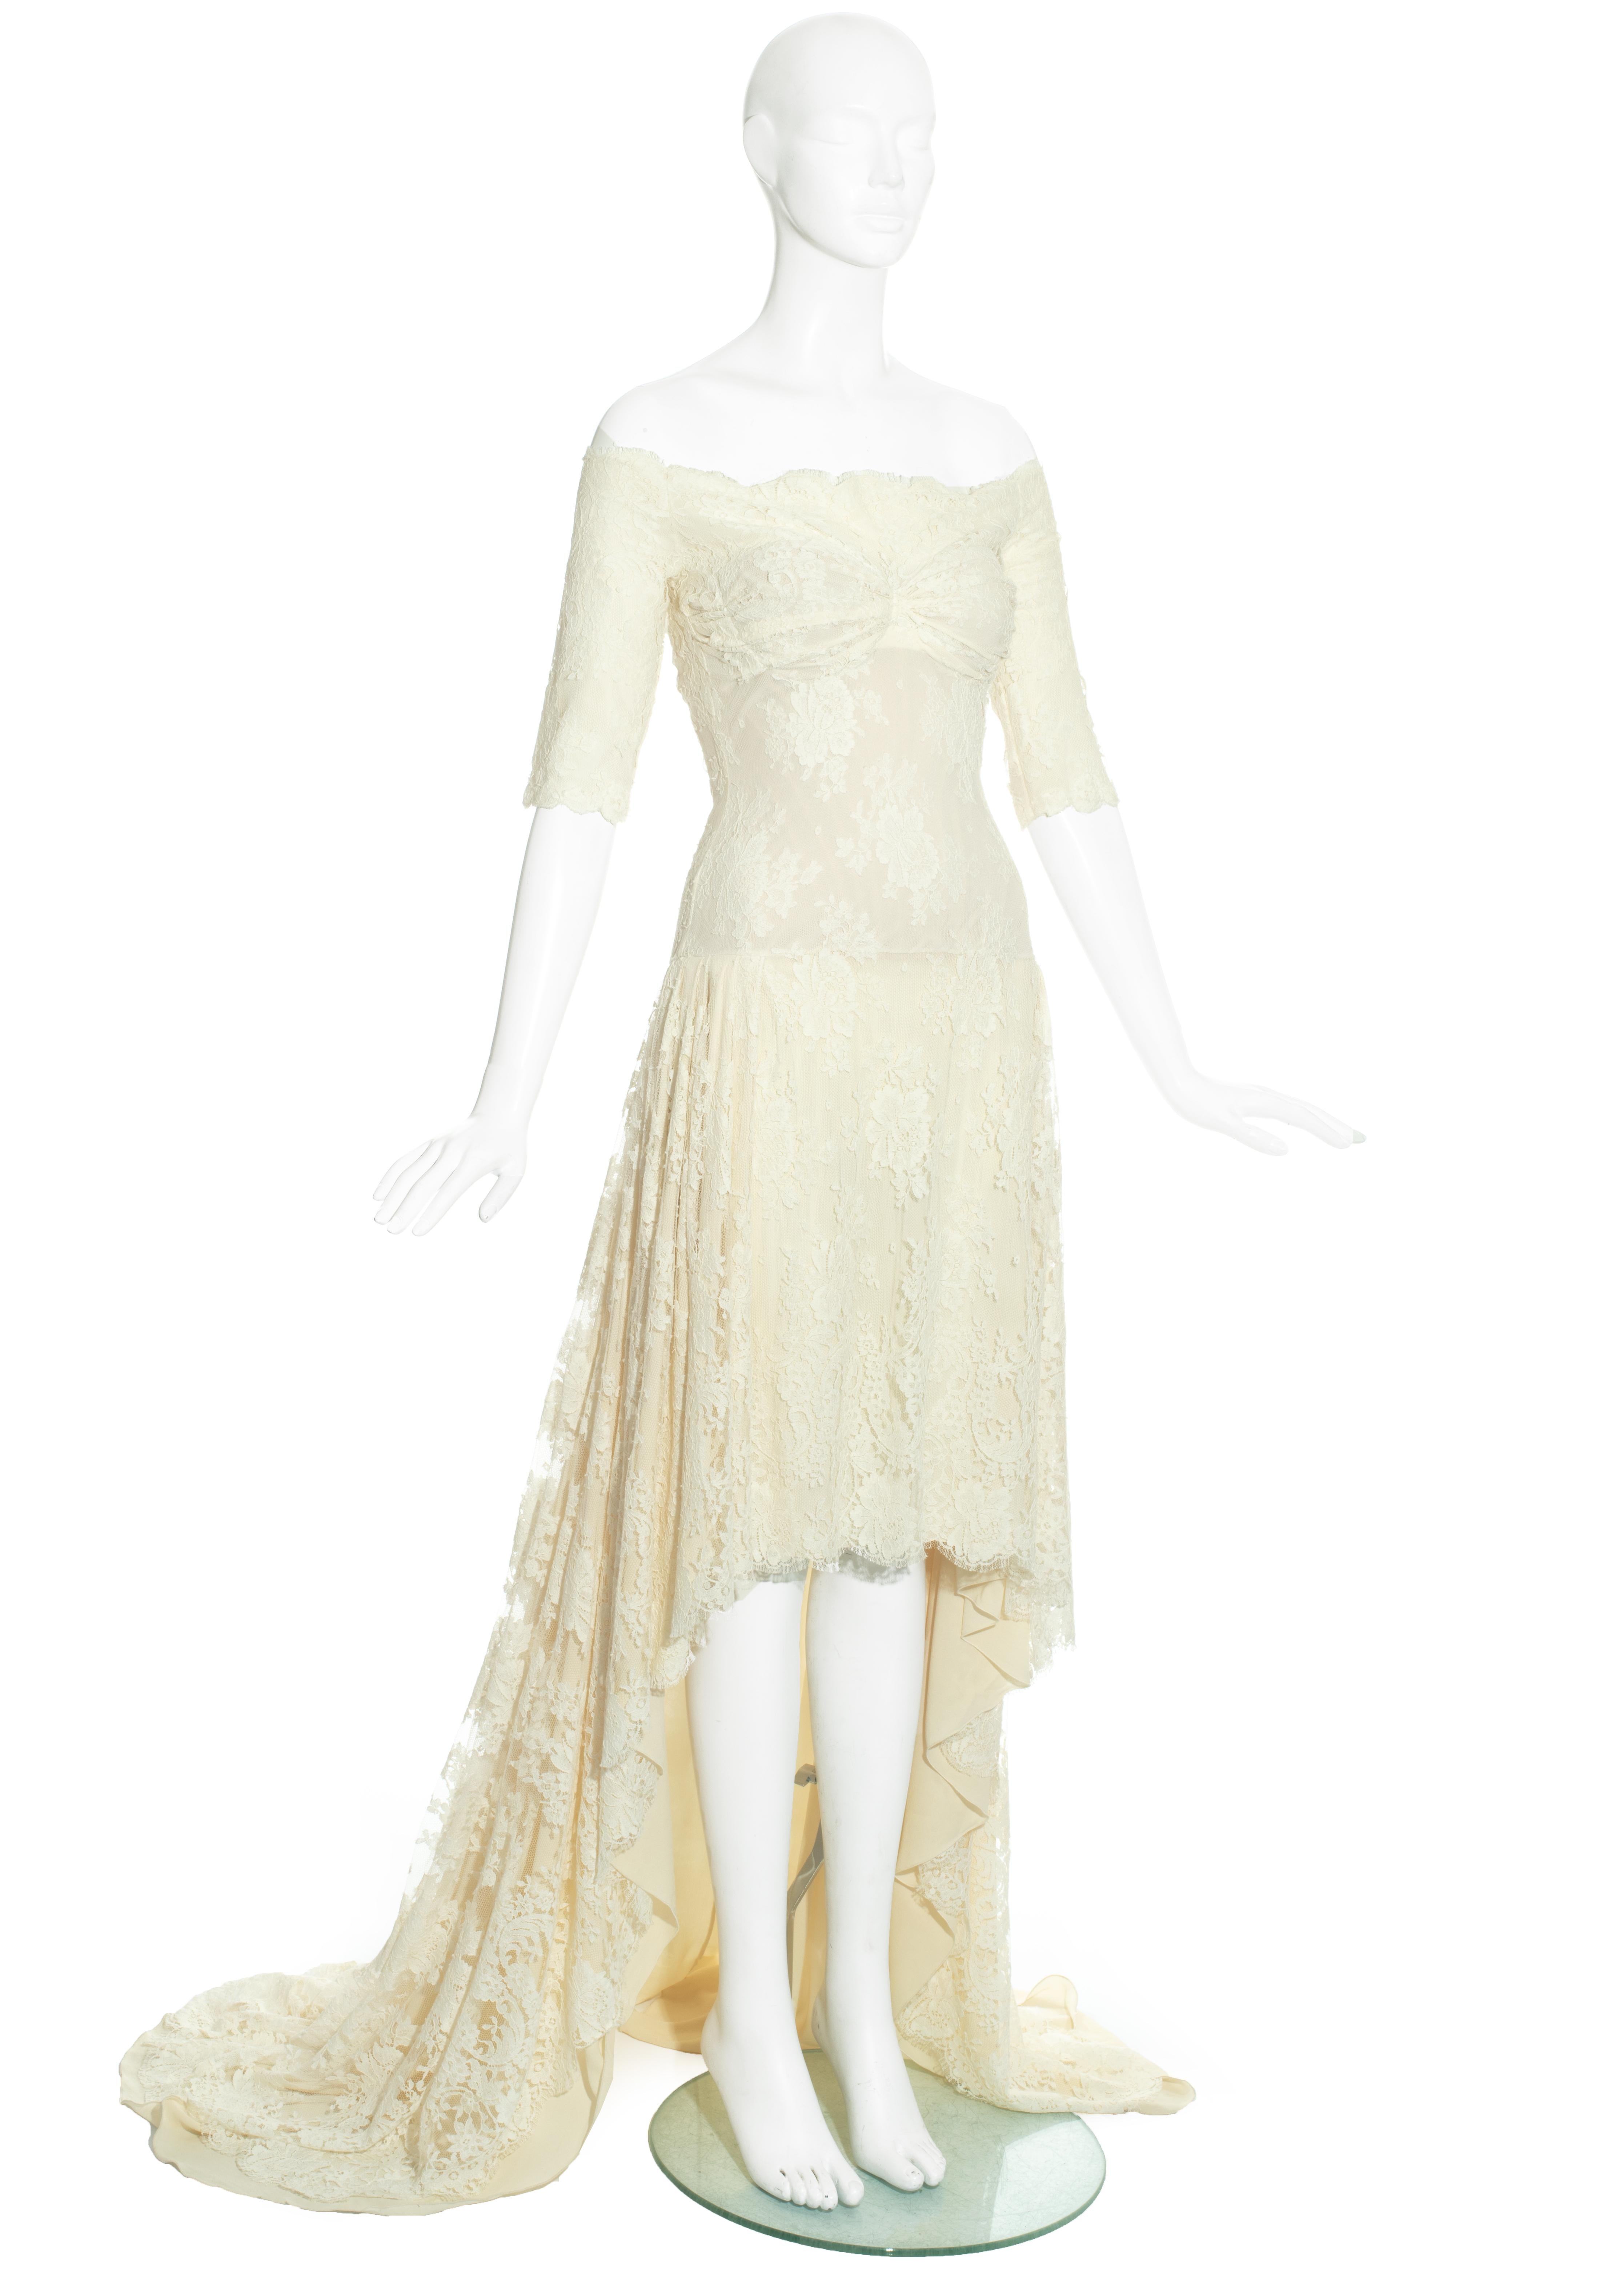 Alexander McQueen ivory lace evening dress with internal corset, dropped shoulders and the skirt cut short at the front and long trained hem.

'Sarabande', Spring-Summer 2007